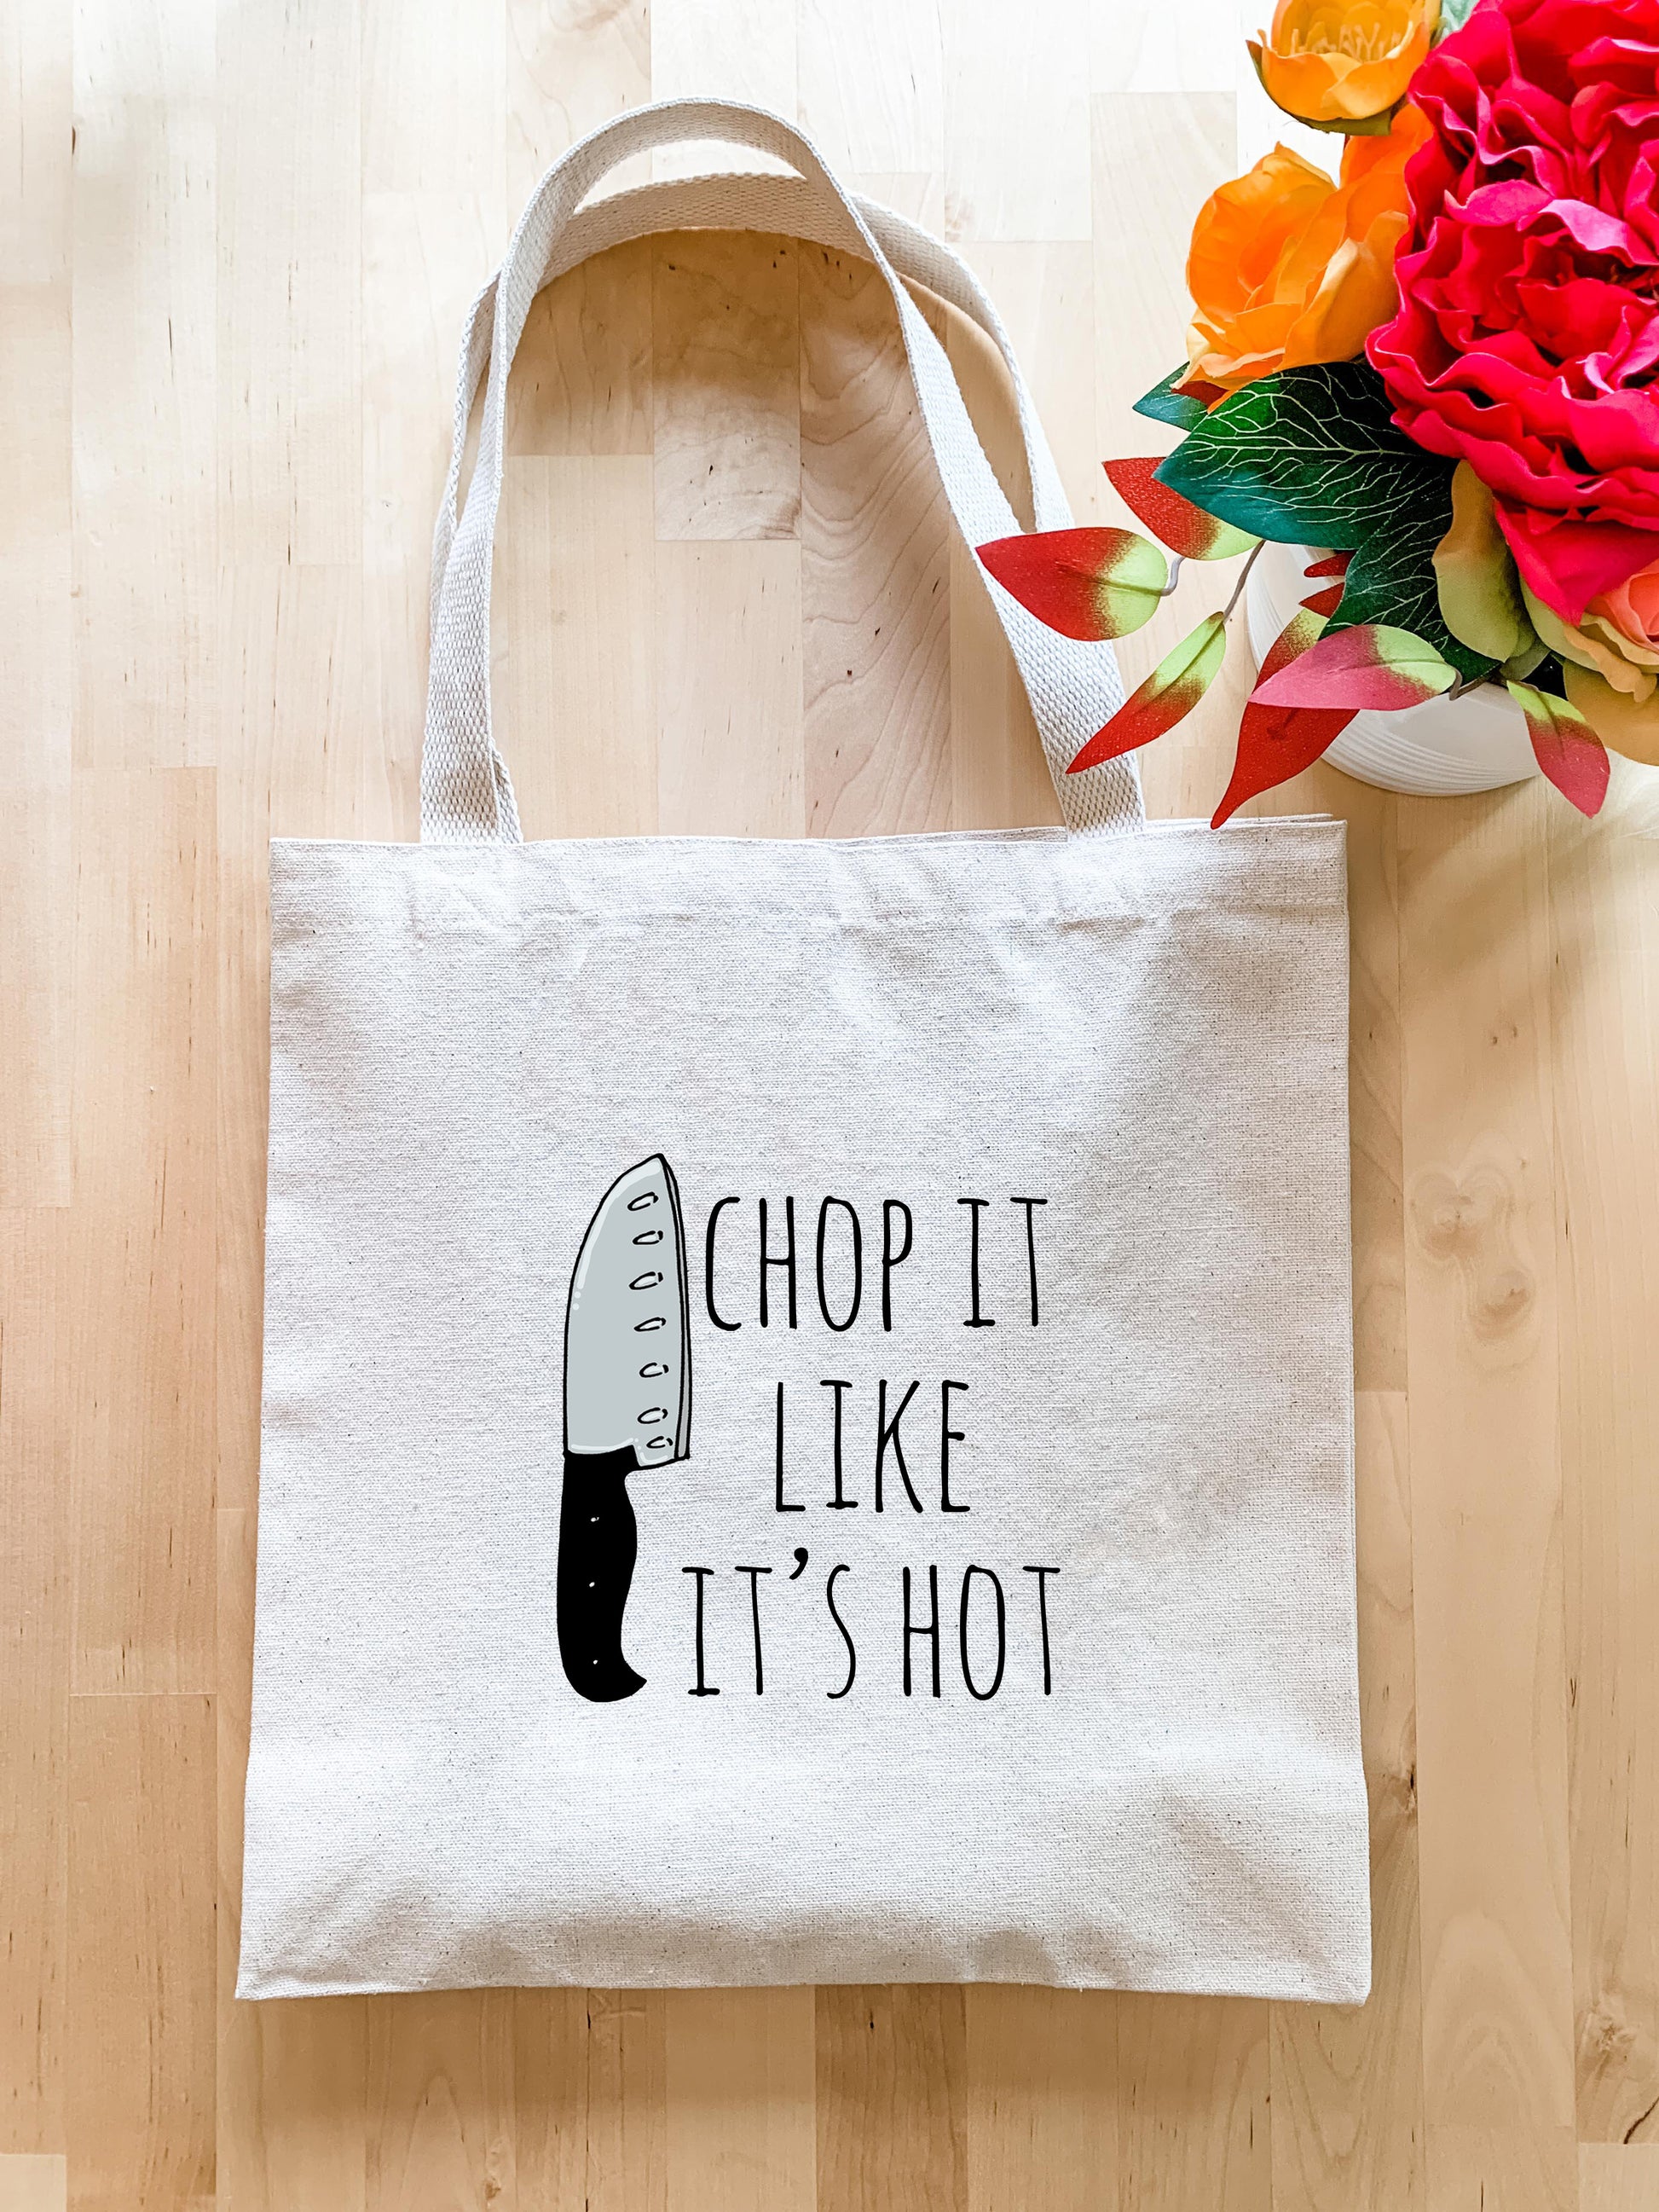 a tote bag with a knife on it next to a vase of flowers